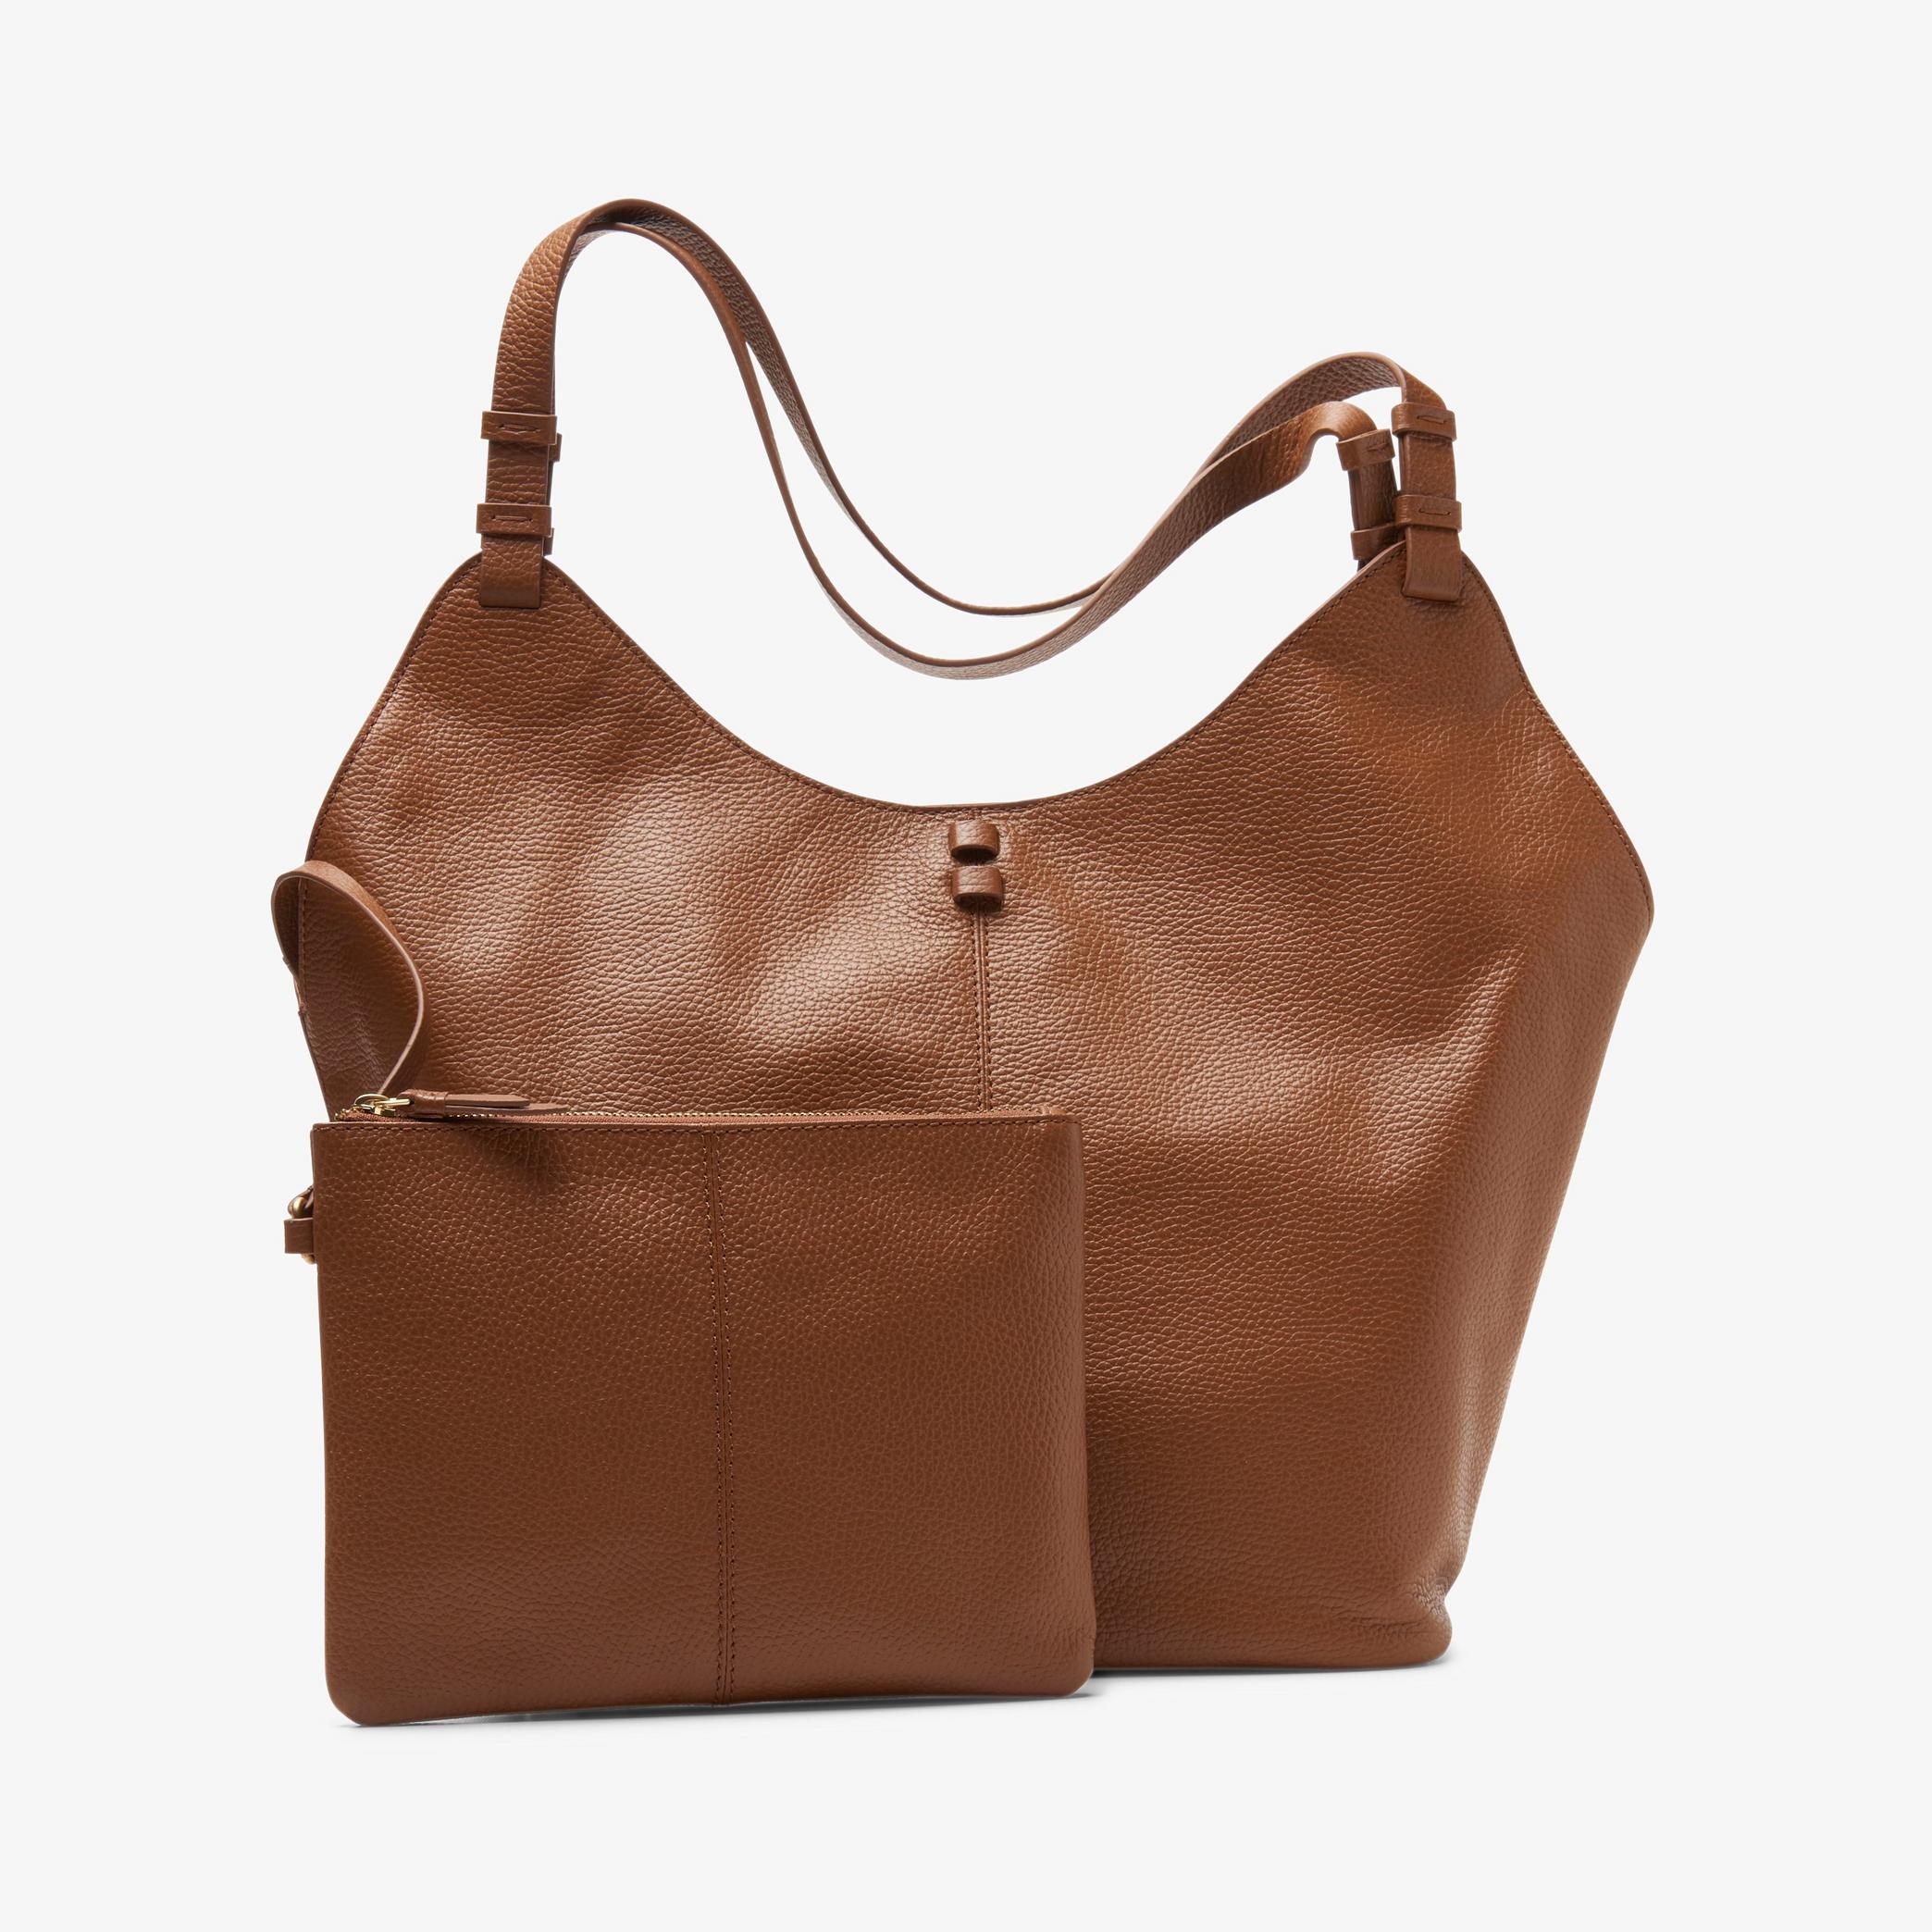 Casual Tote Tan Leather Tote Bag, view 5 of 5